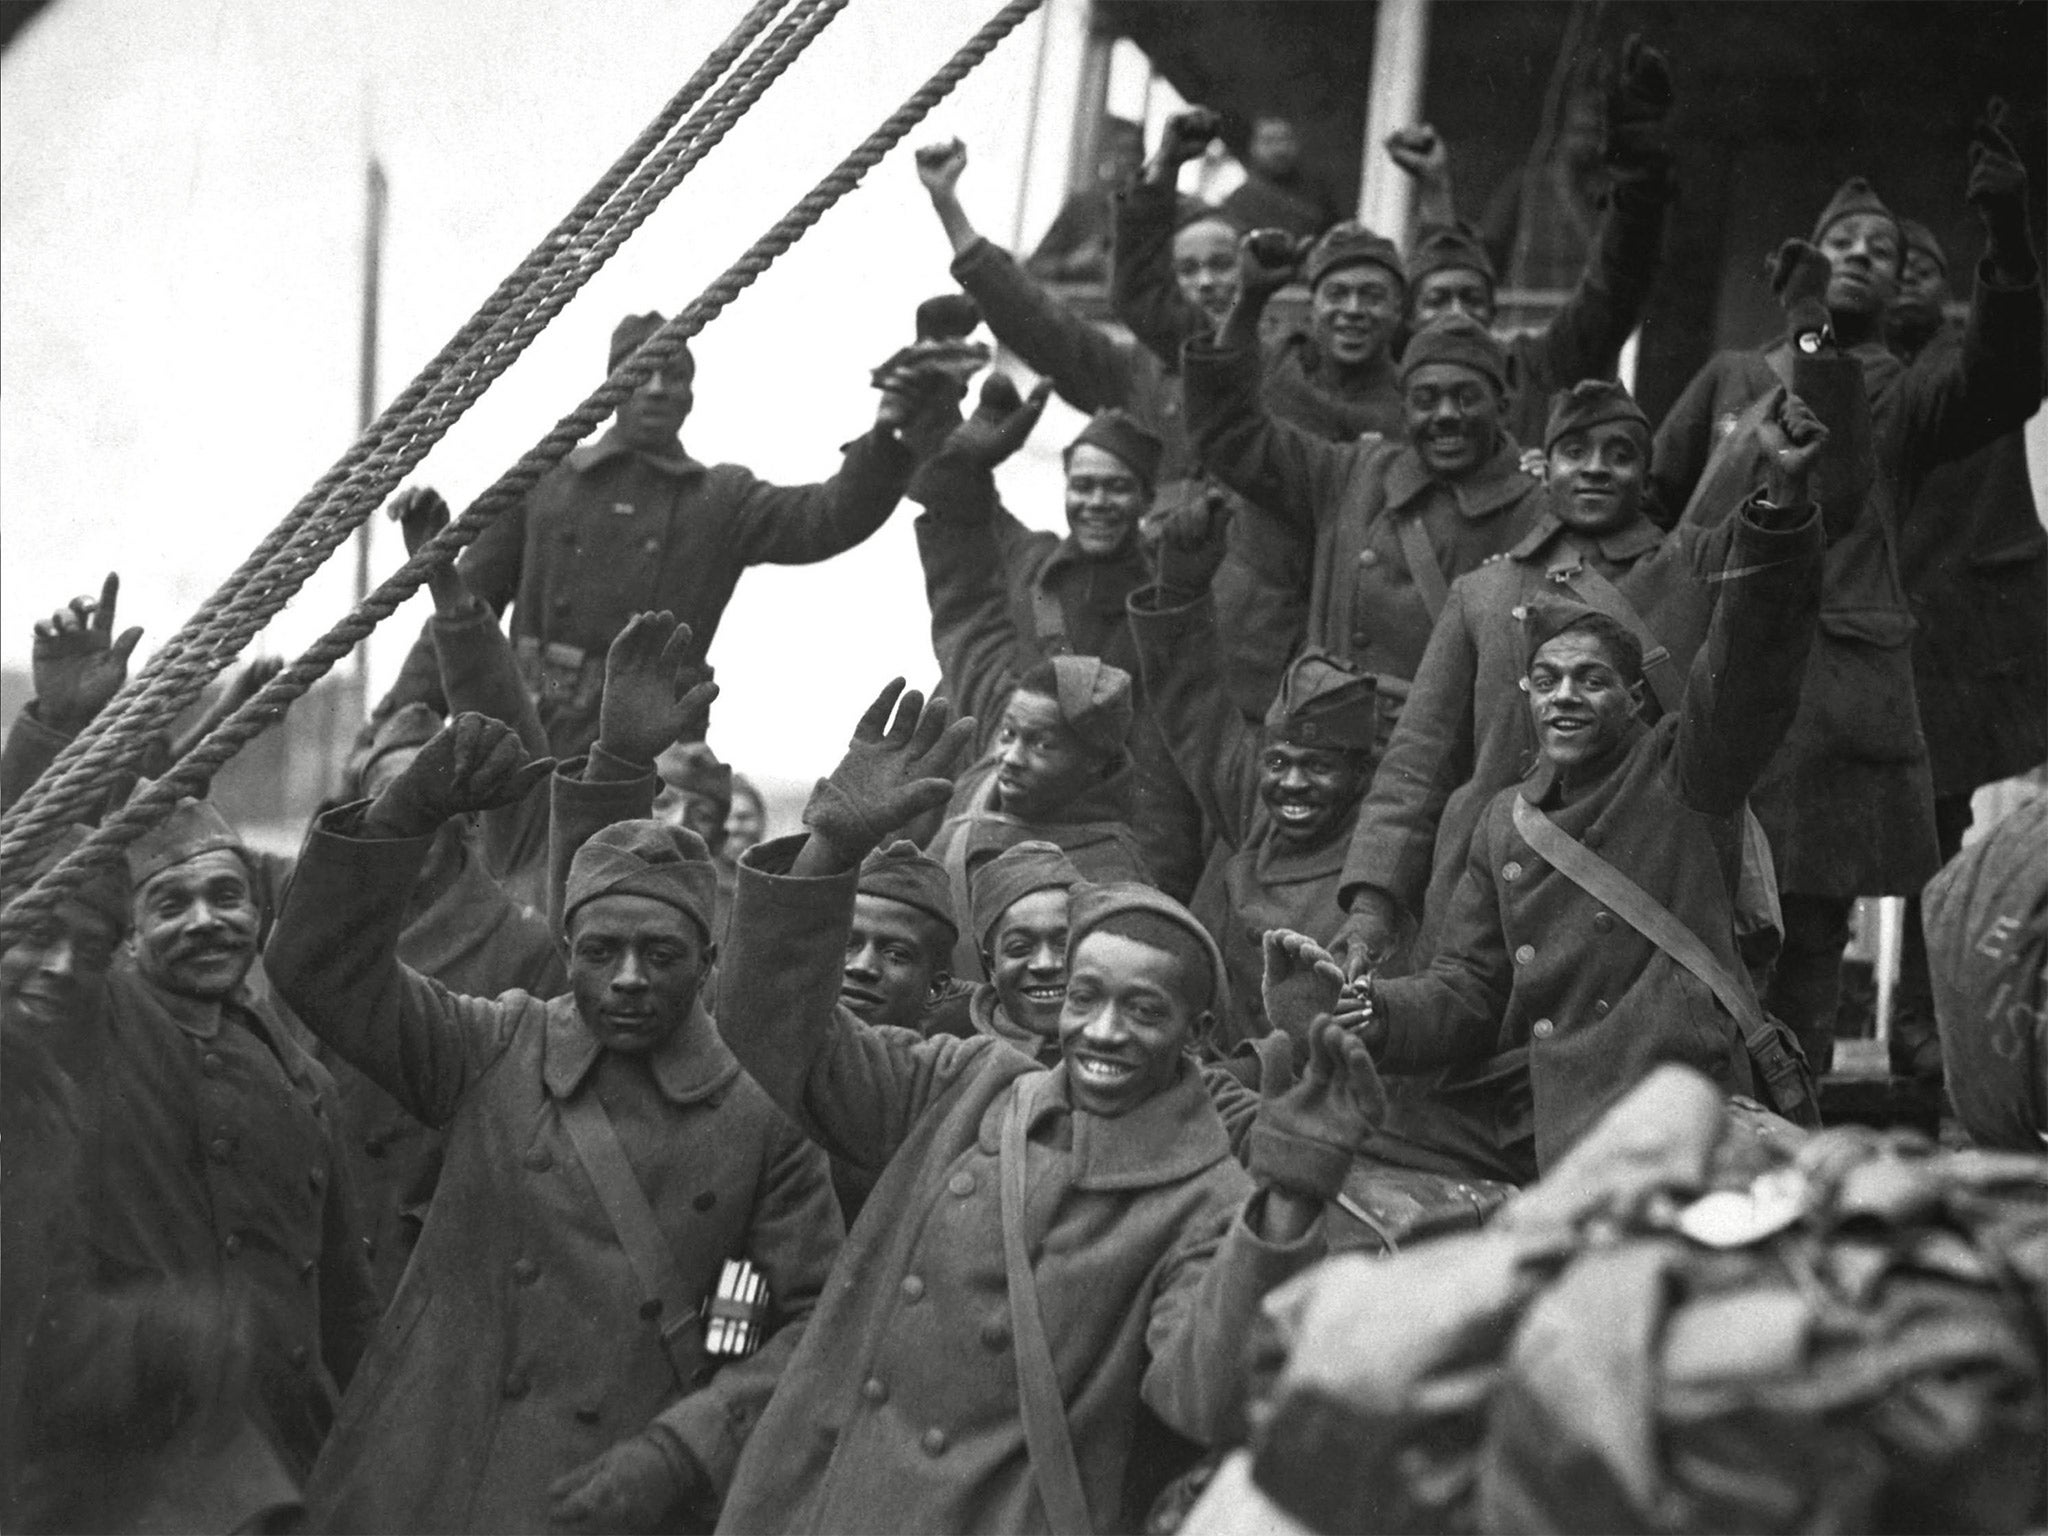 Hell, yeah: members of the 369th Infantry arrive back in New York